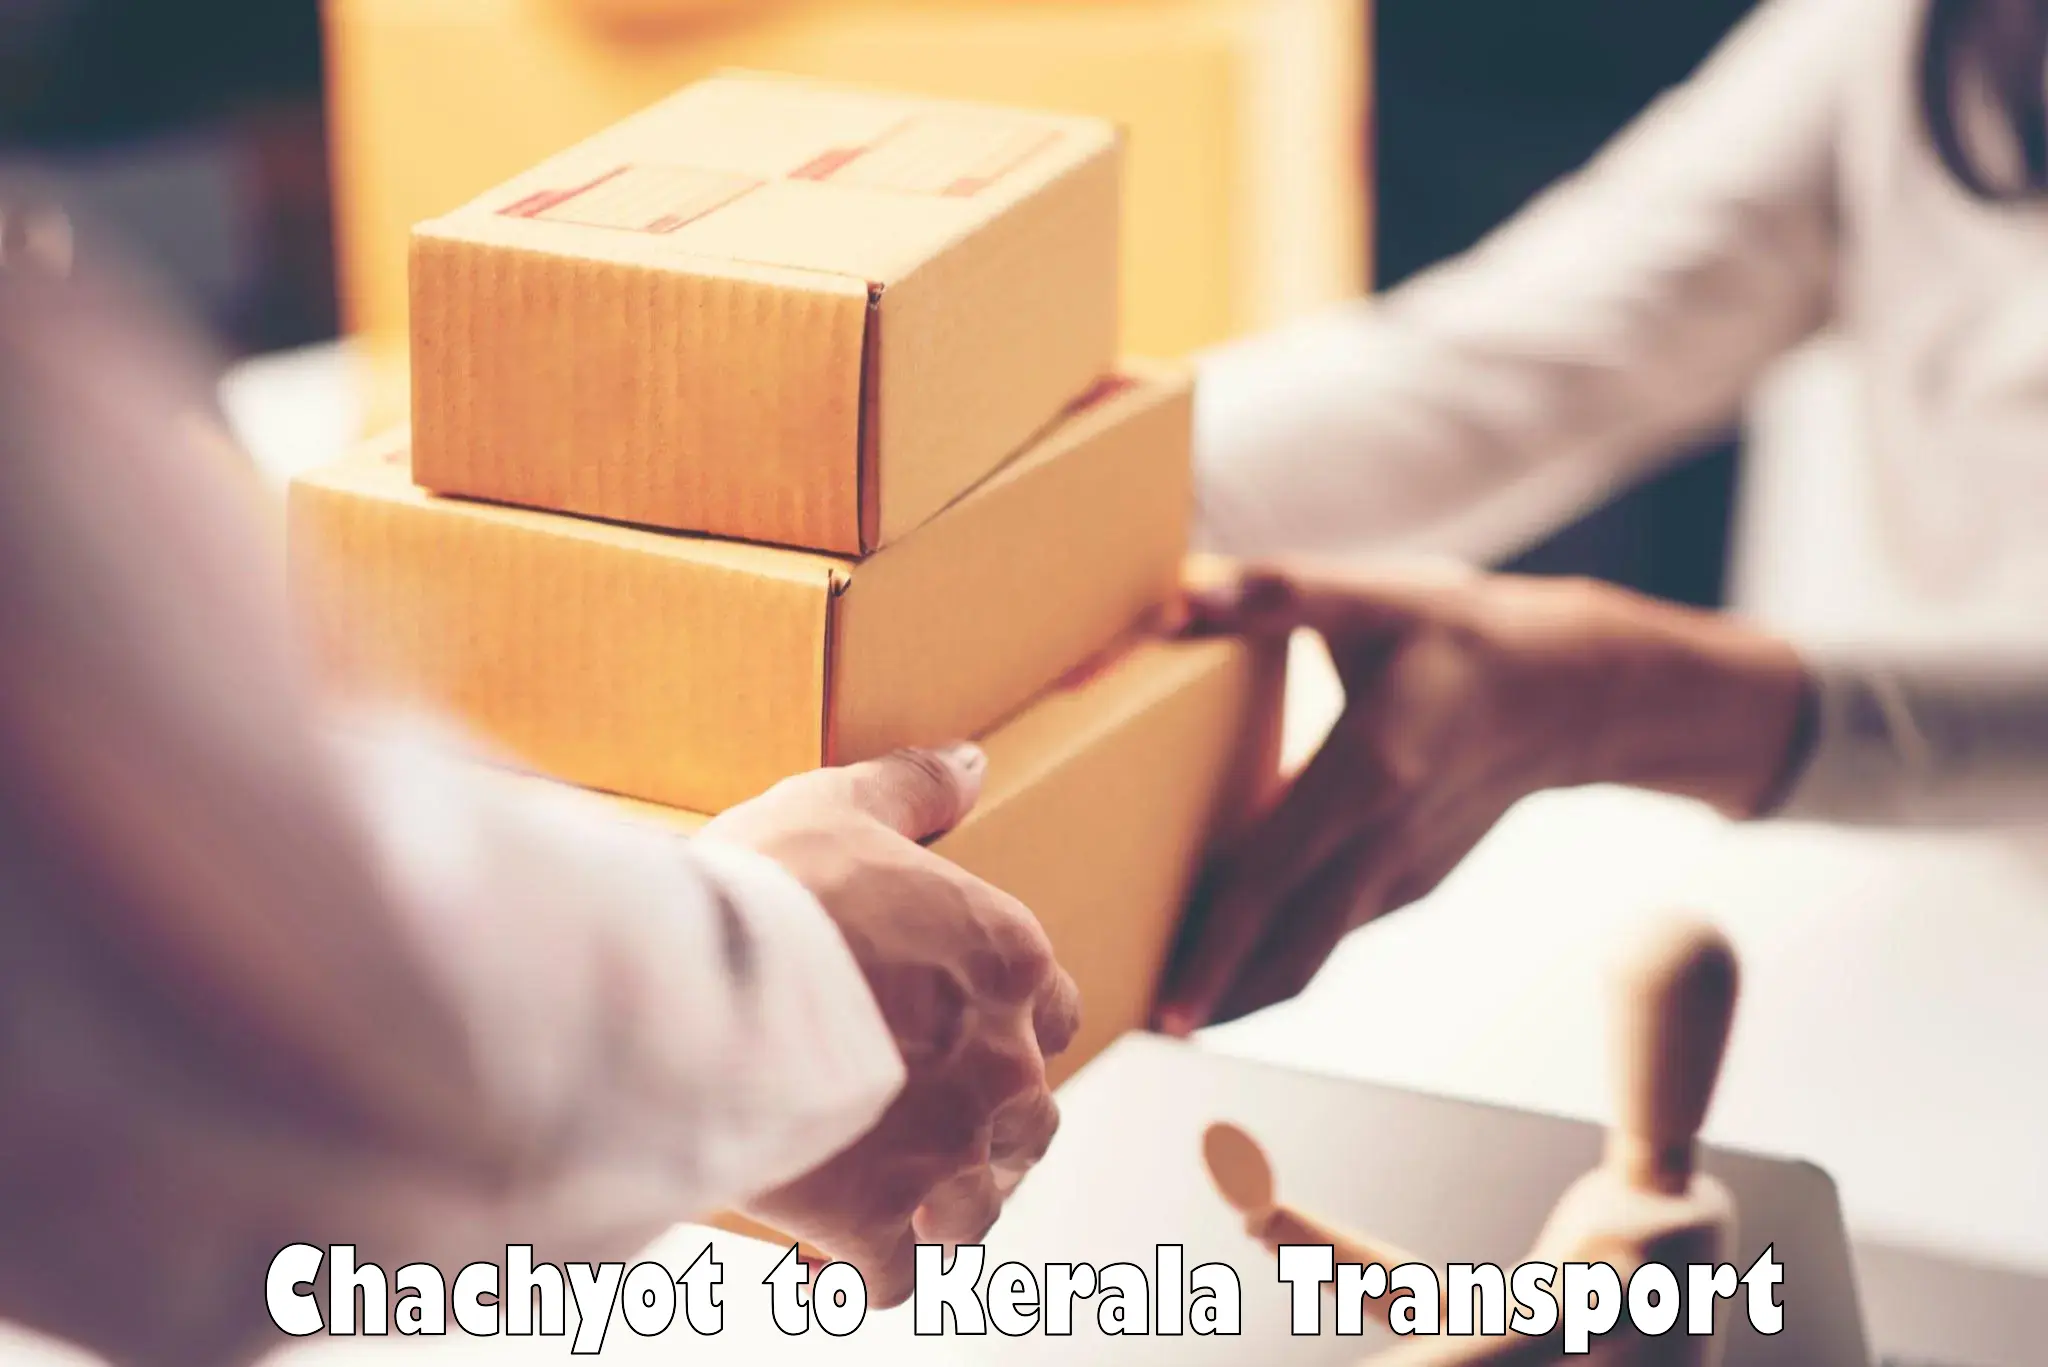 Parcel transport services Chachyot to Cochin Port Kochi